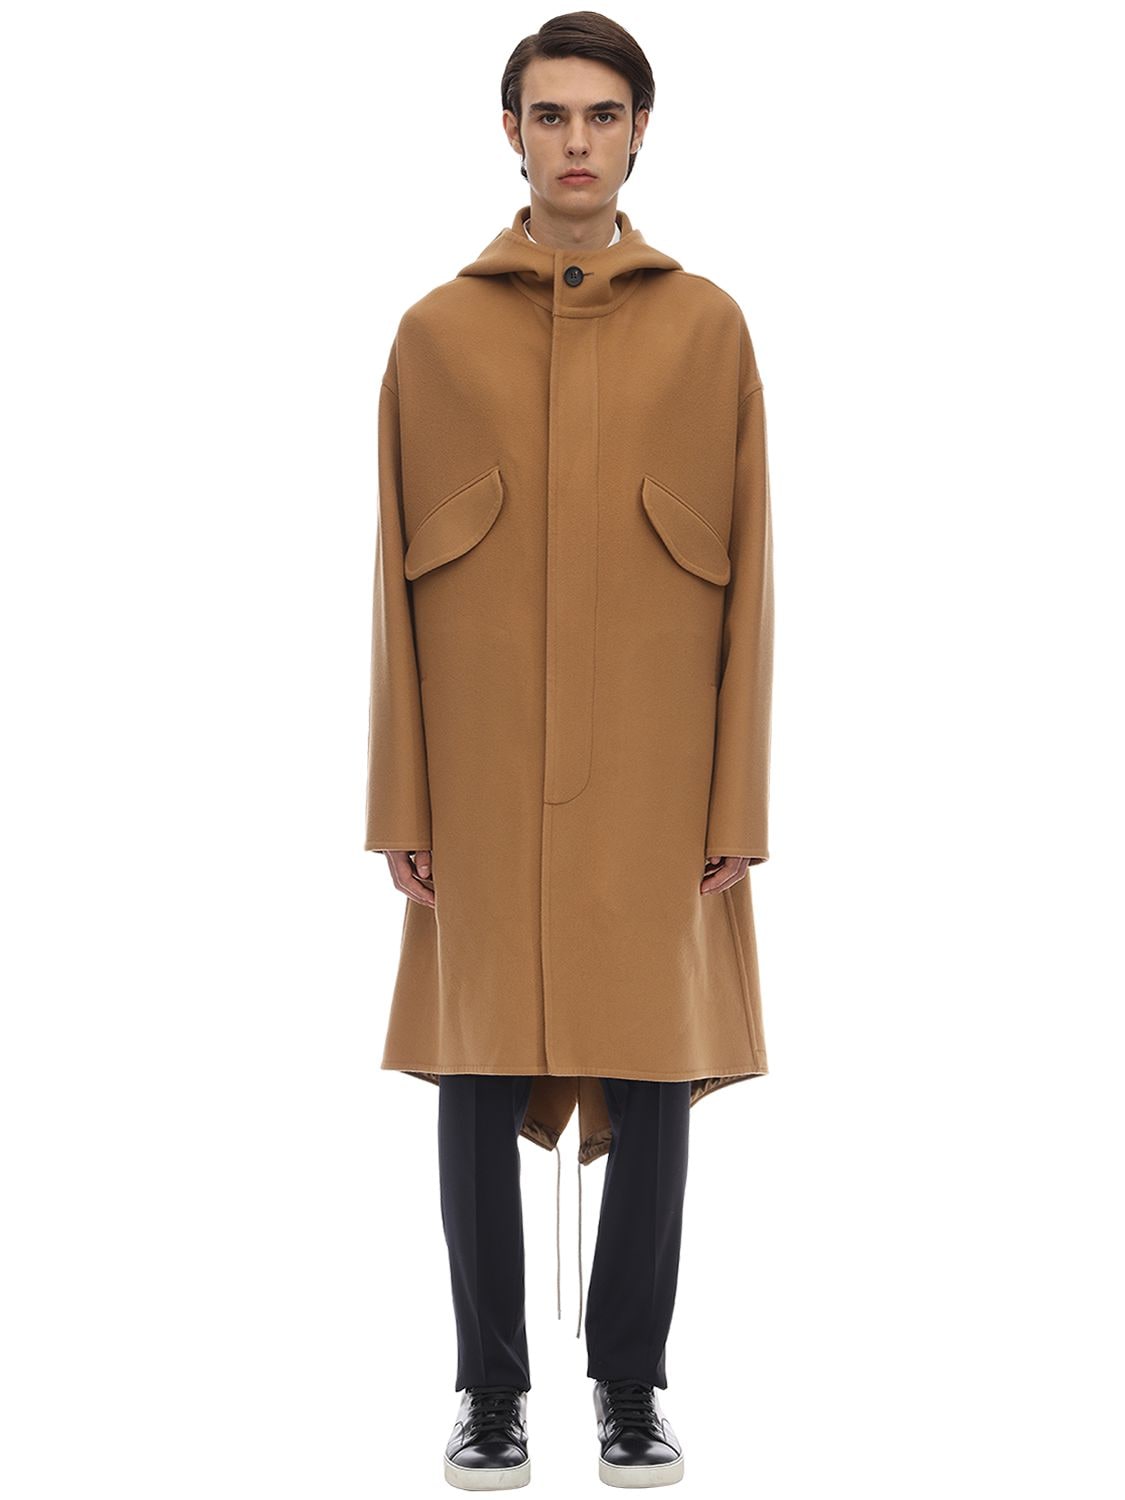 LANVIN HOODED WOOL & CASHMERE COAT,70IAGD010-NJY1